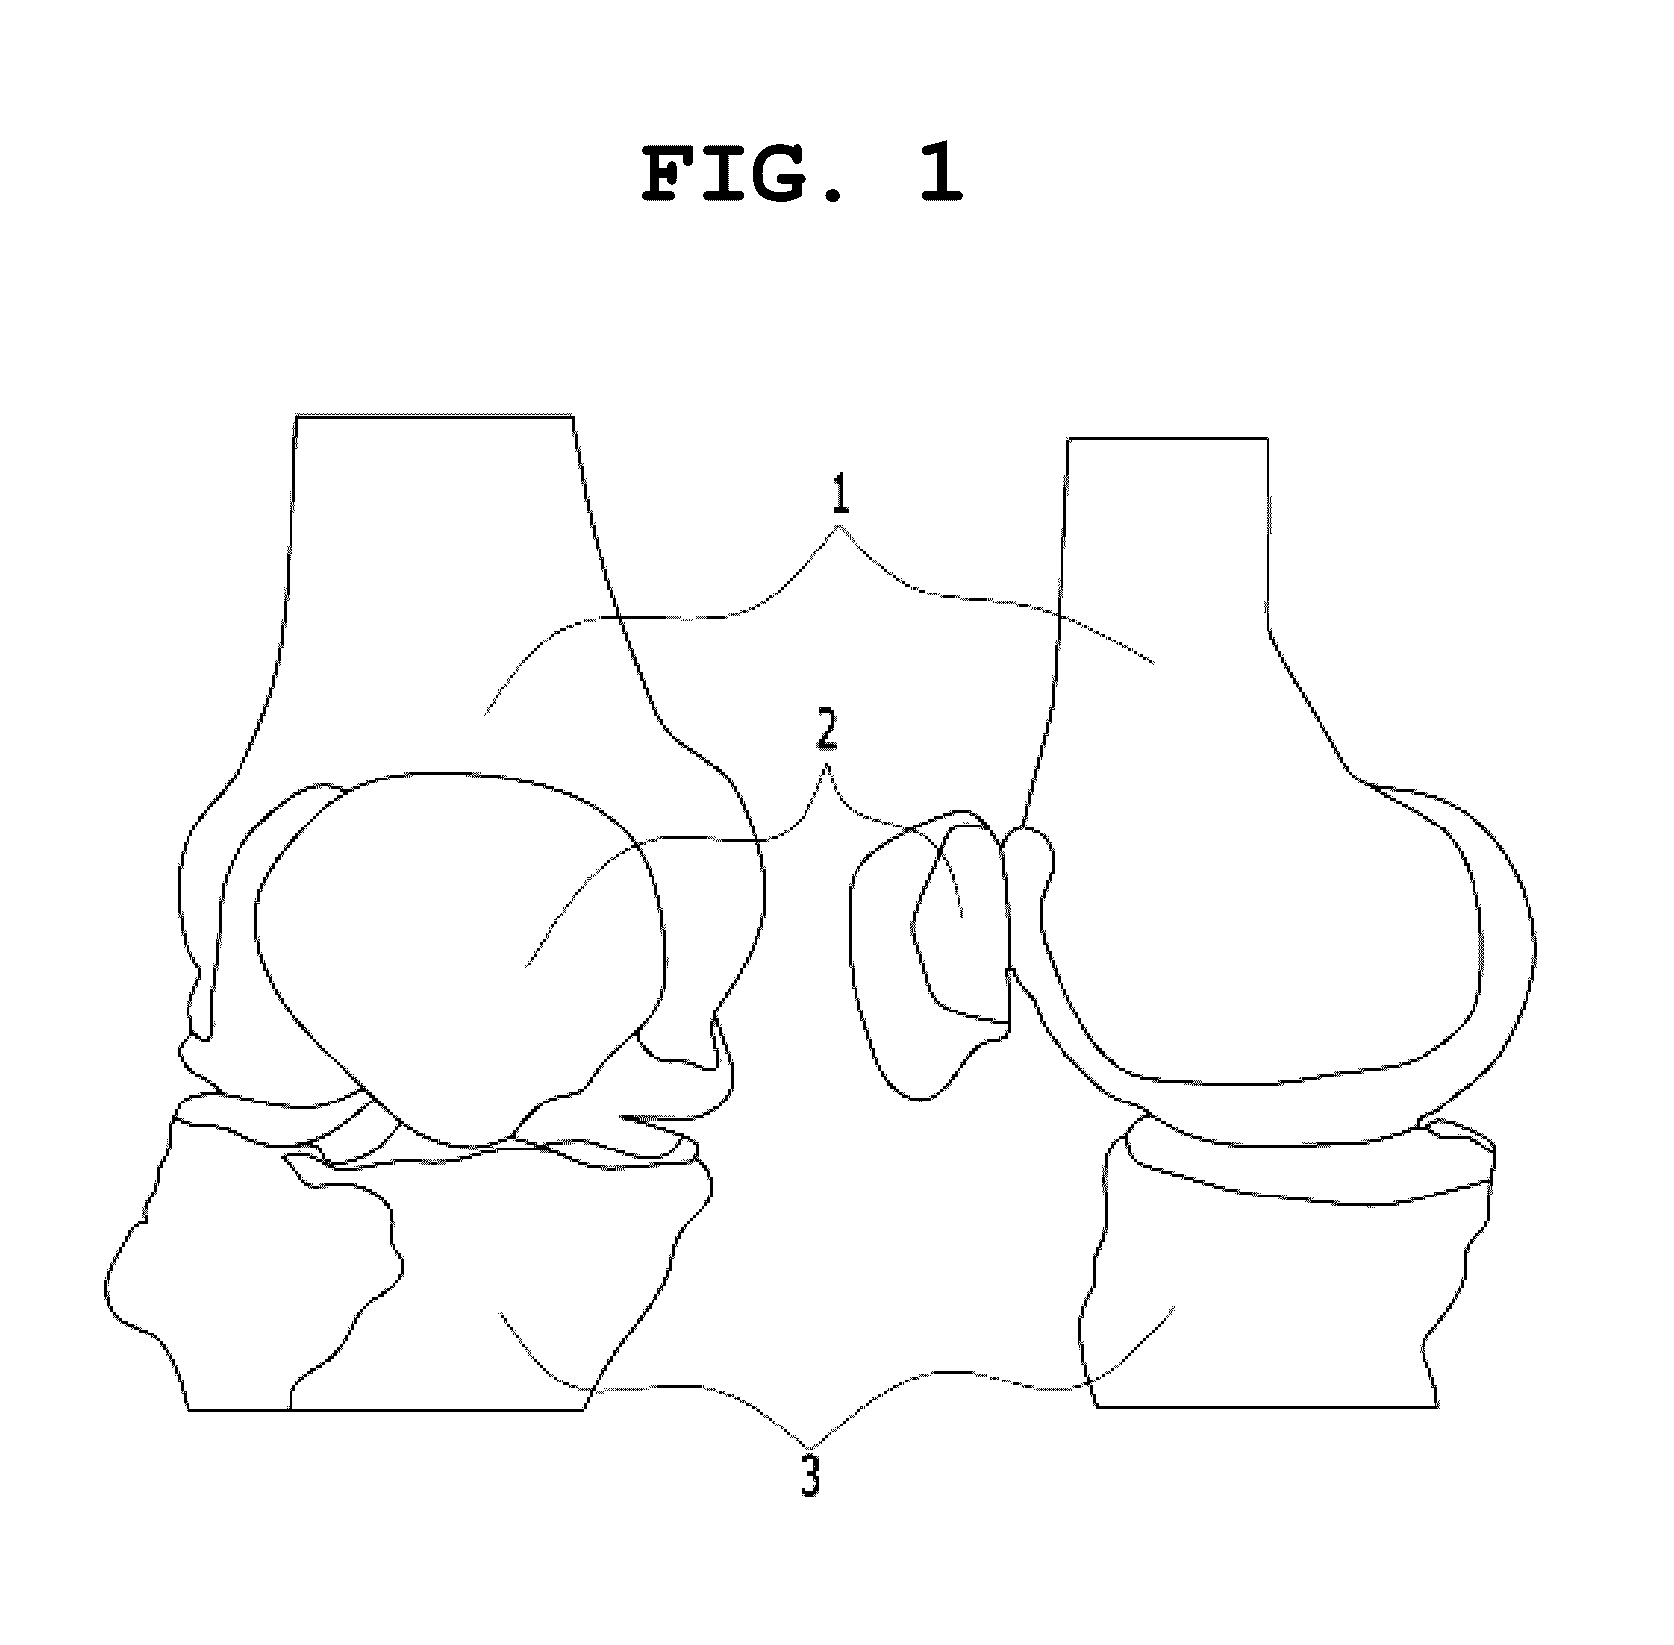 System and method for simulating reconstructive surgery of anterior cruciate ligament using medical images